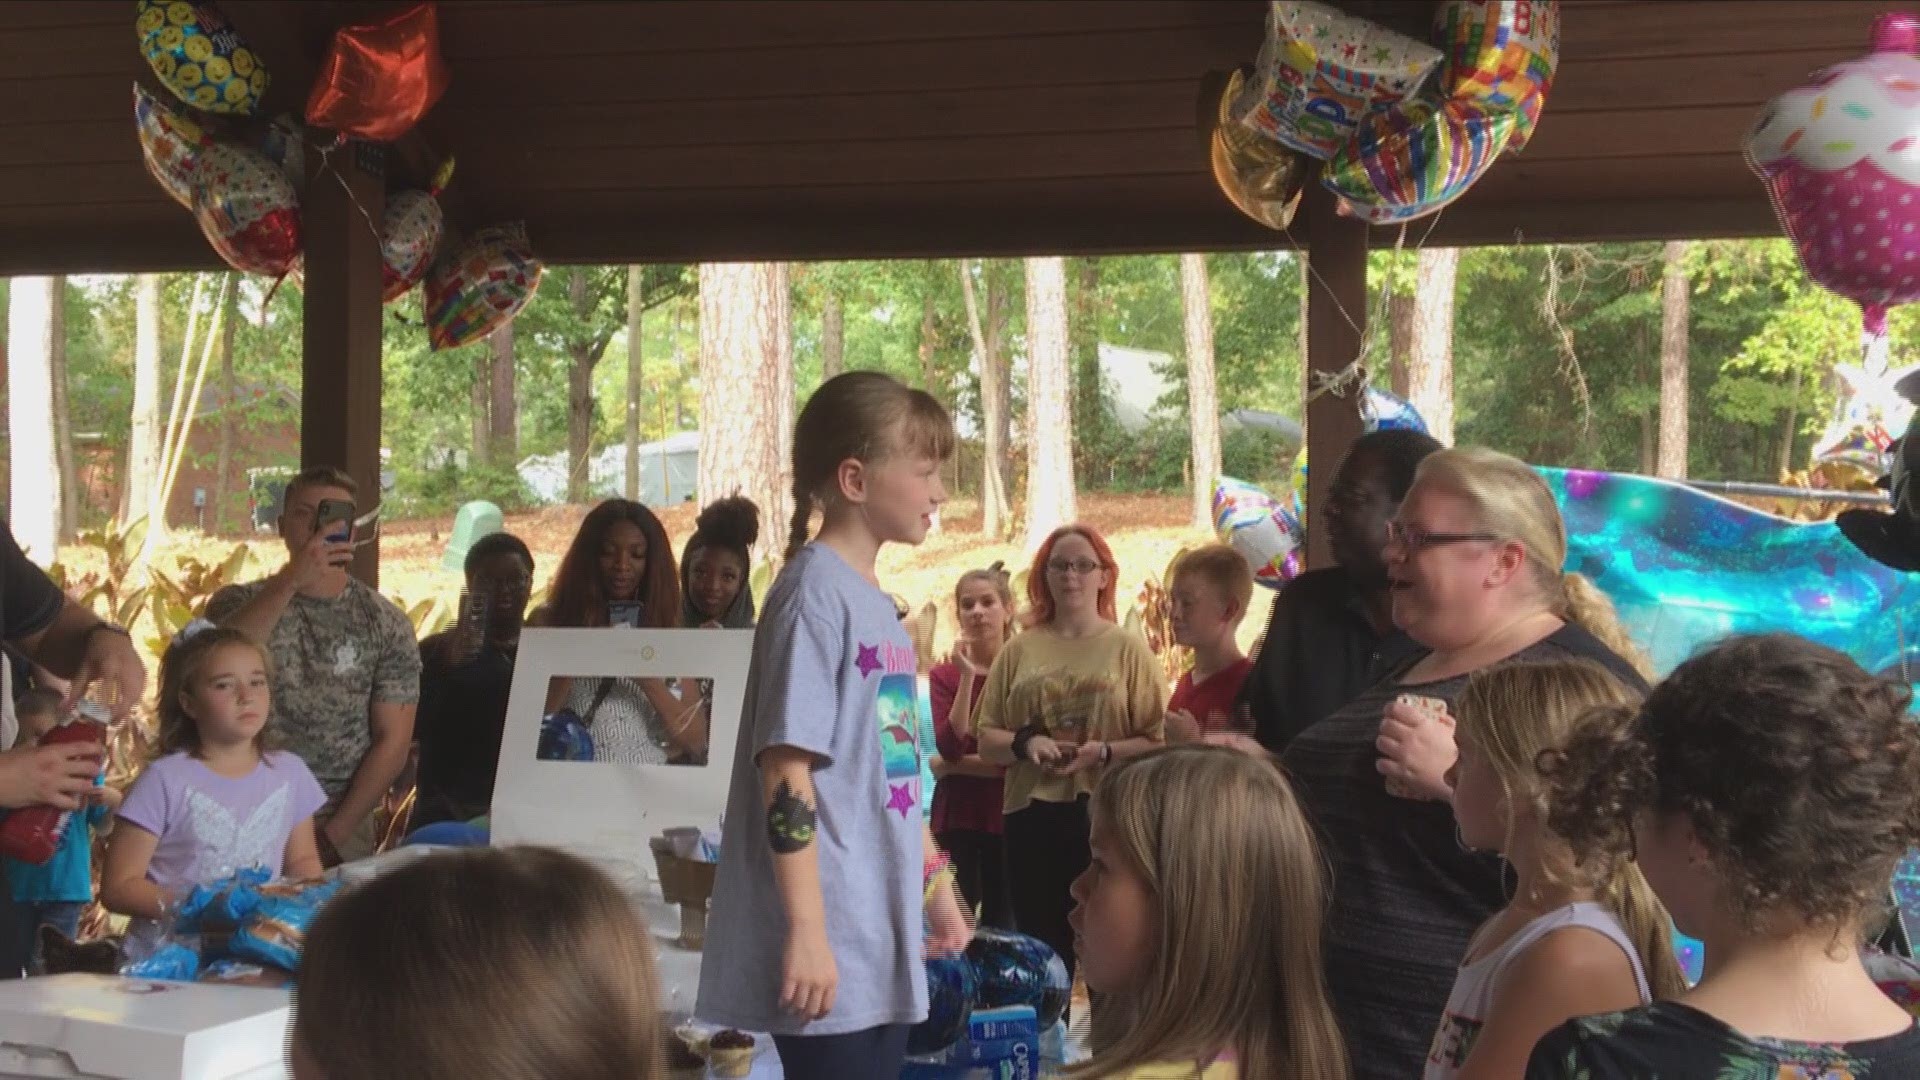 Maelynn Hurley celebrated eighth birthday with a crowd after mom took to social media